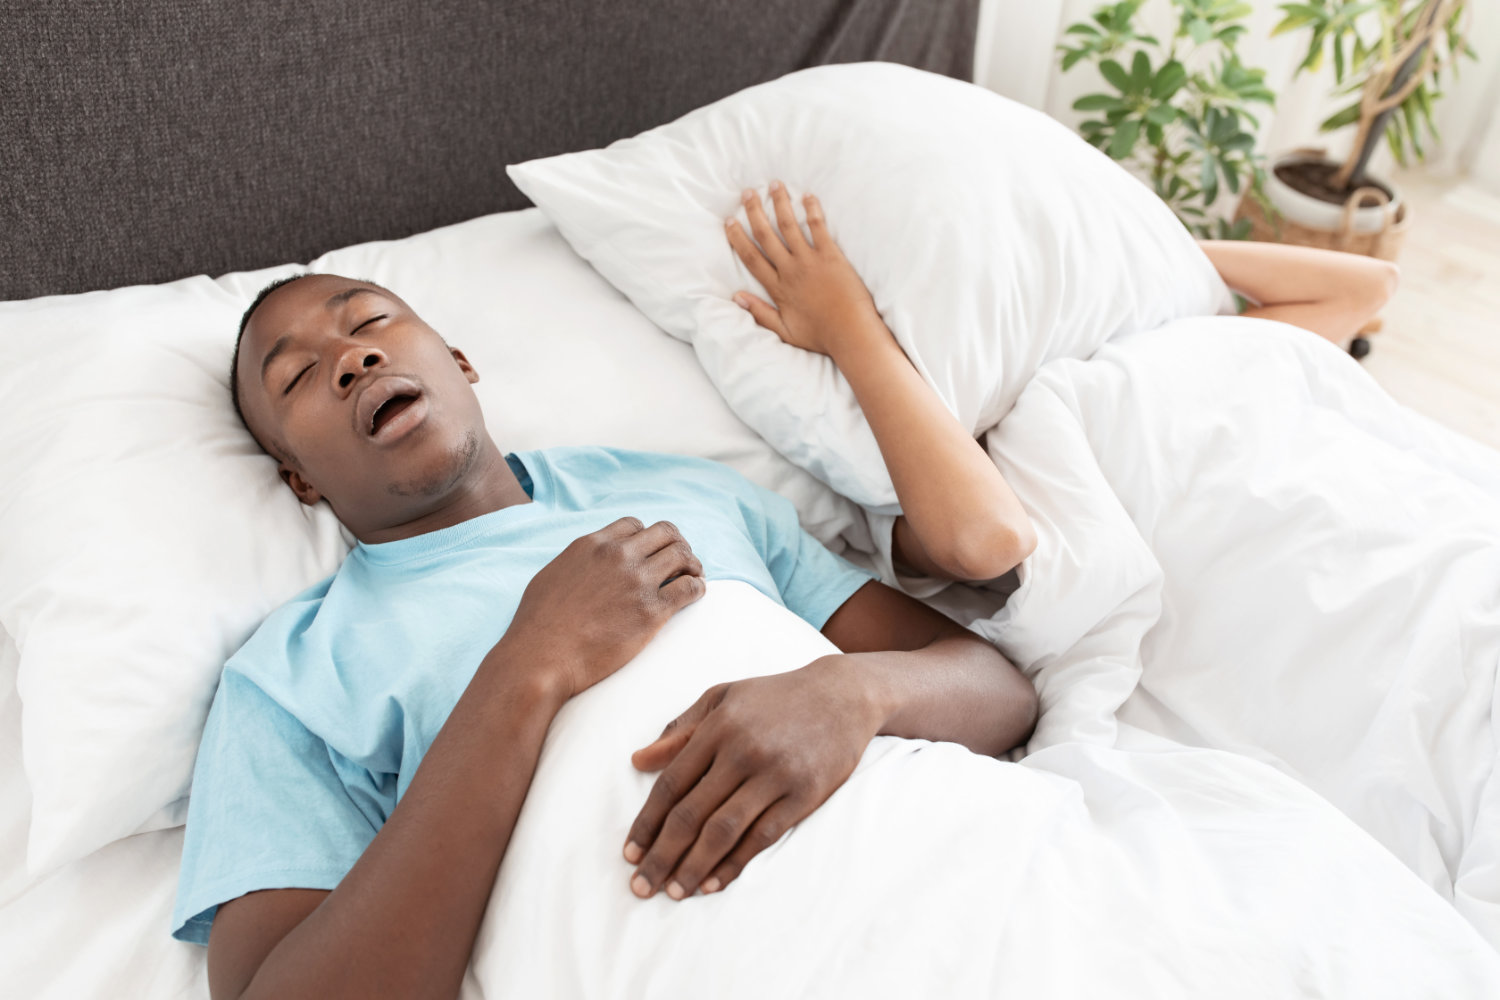 The Fast Facts About Sleep Apnea